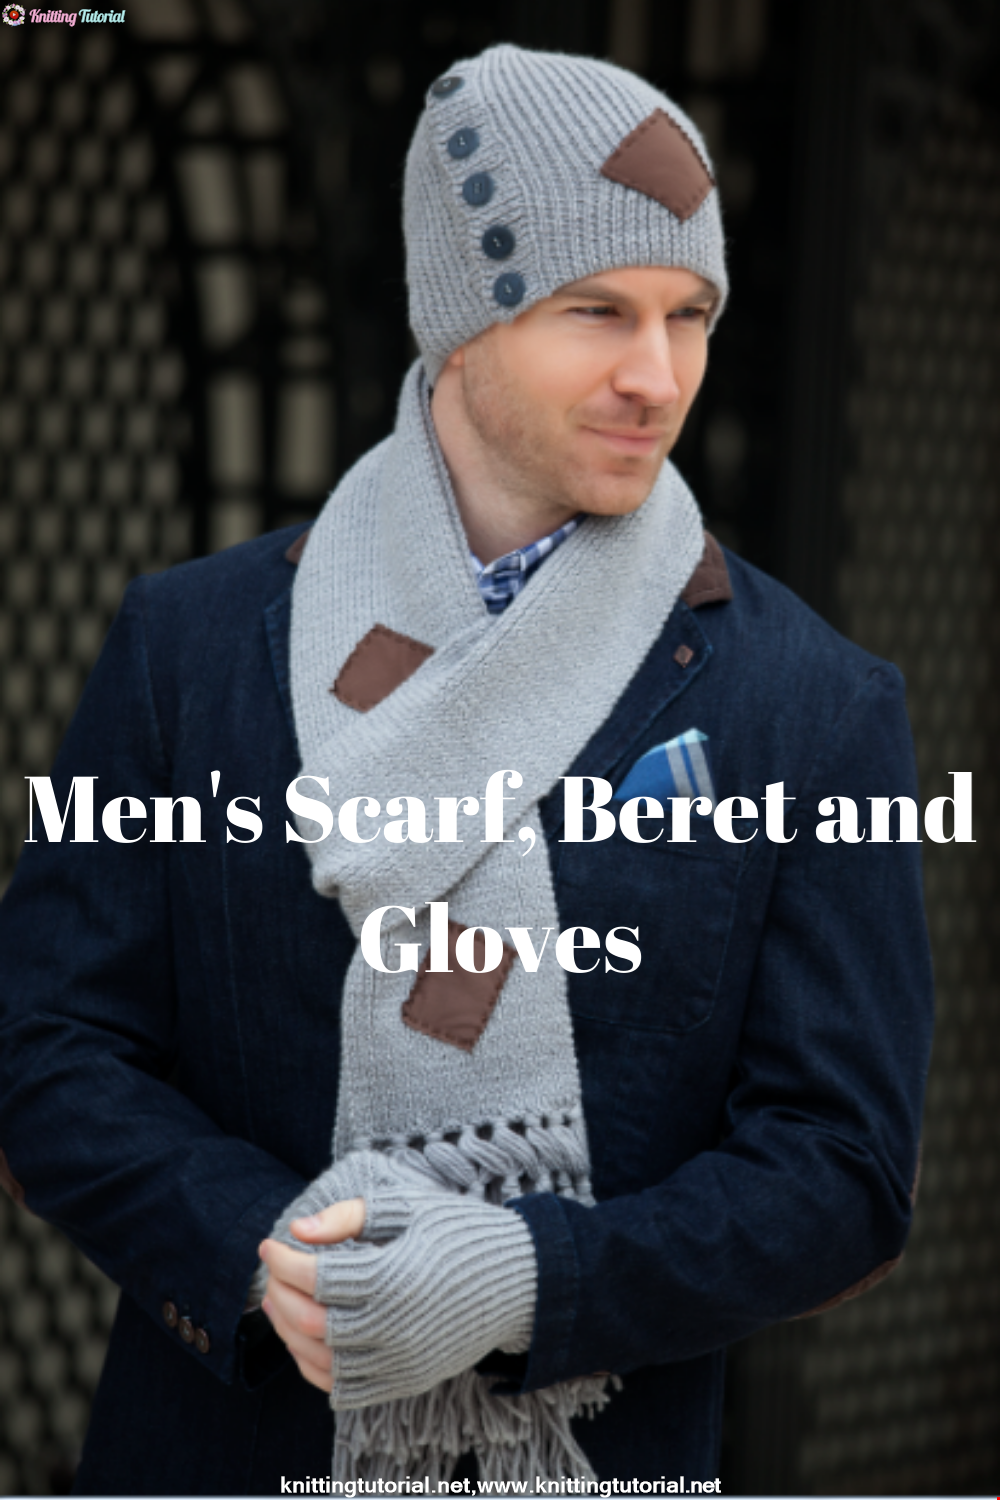 Patched Elastic Knit Men's Scarf, Beret and Glove Making